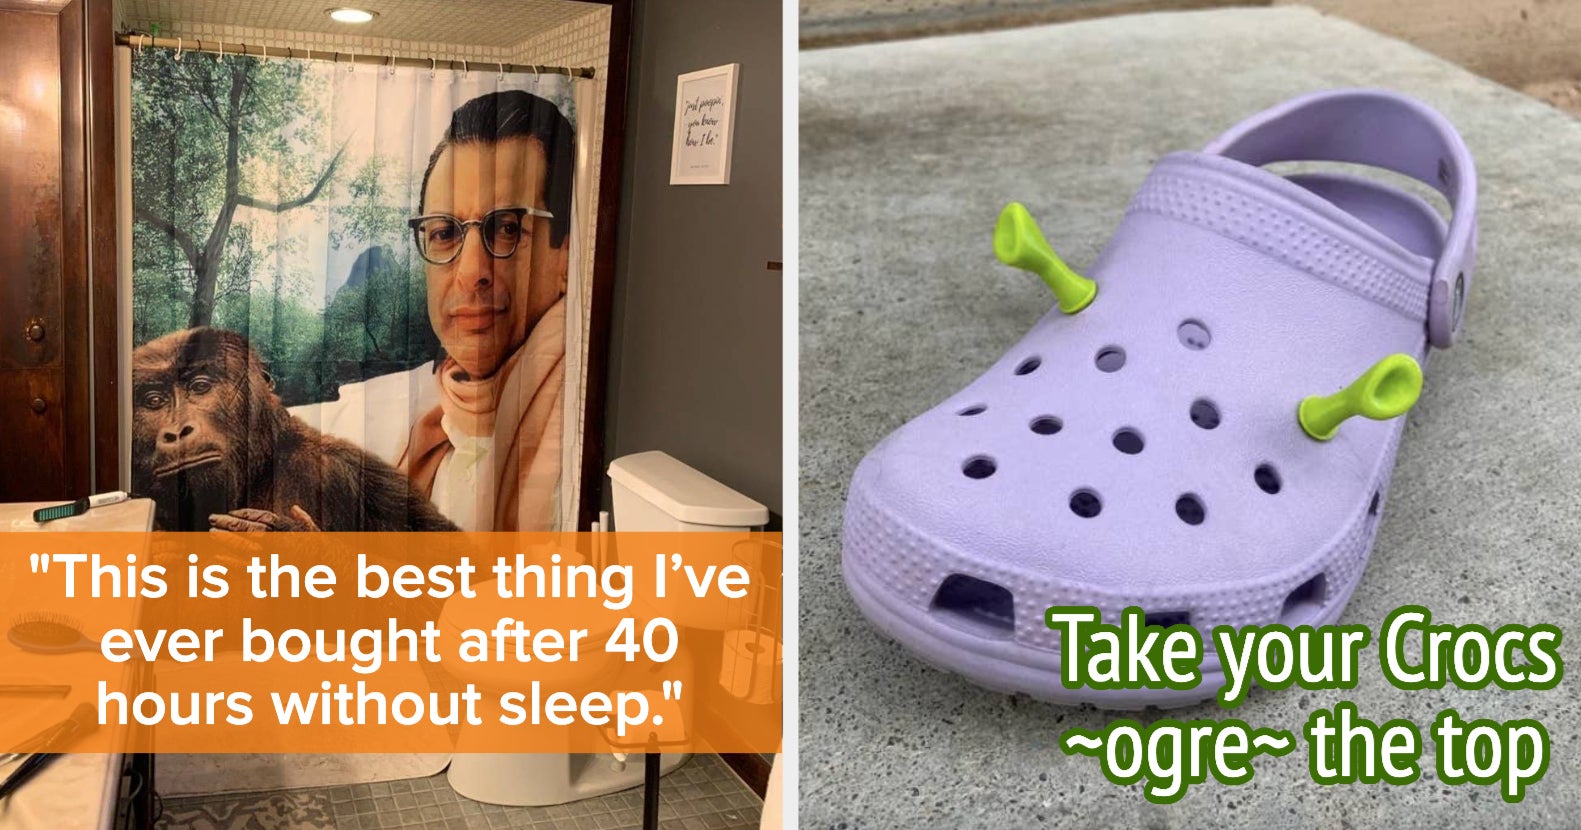 14 Funny Products That Will All Make You Laugh